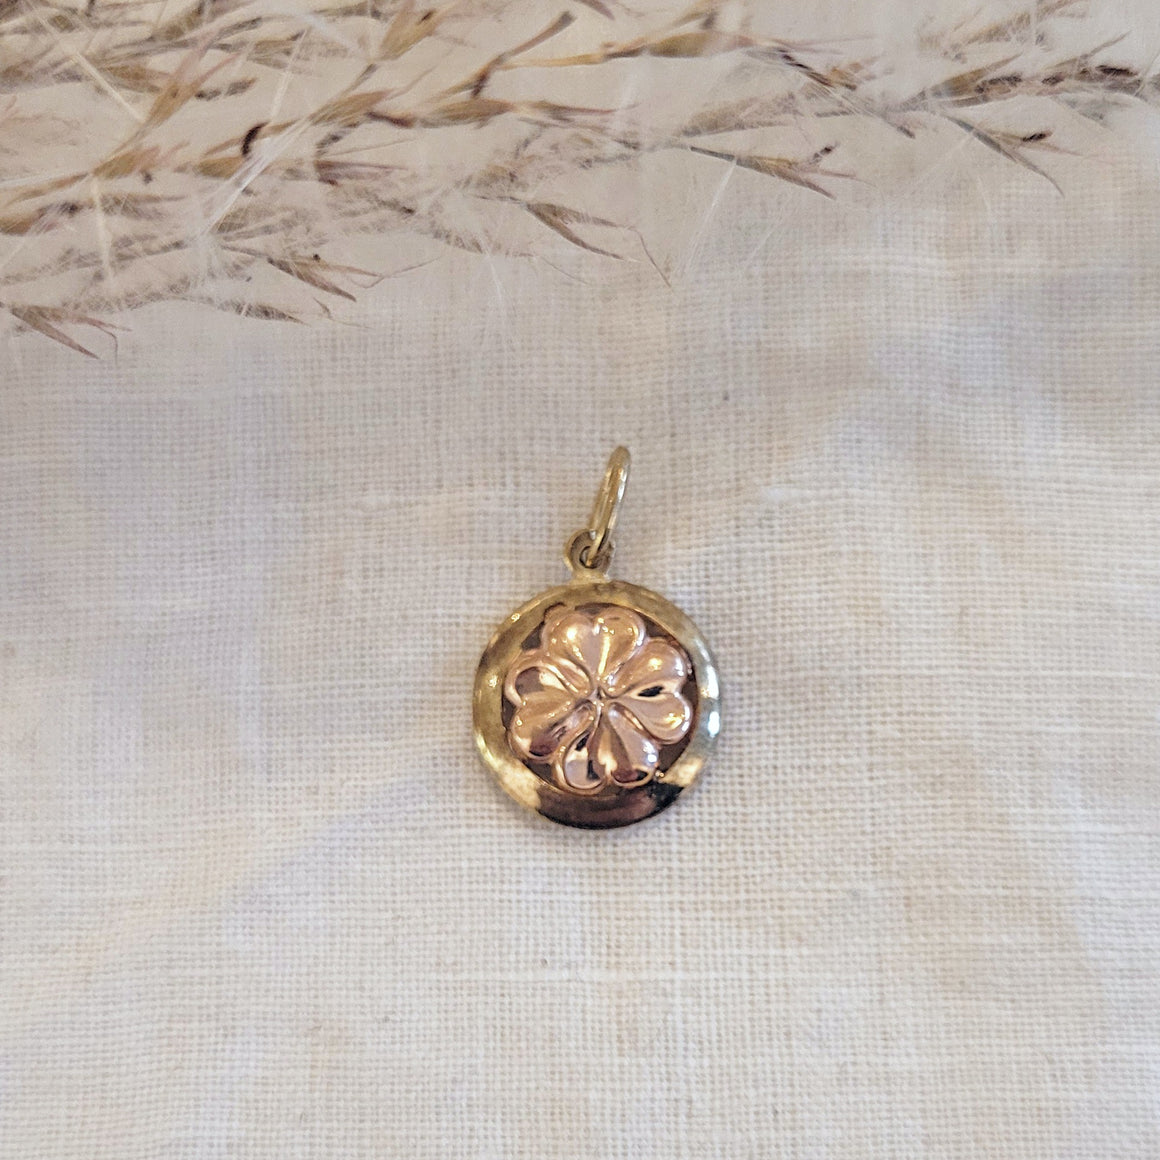 14k yellow gold floral round pendant charm